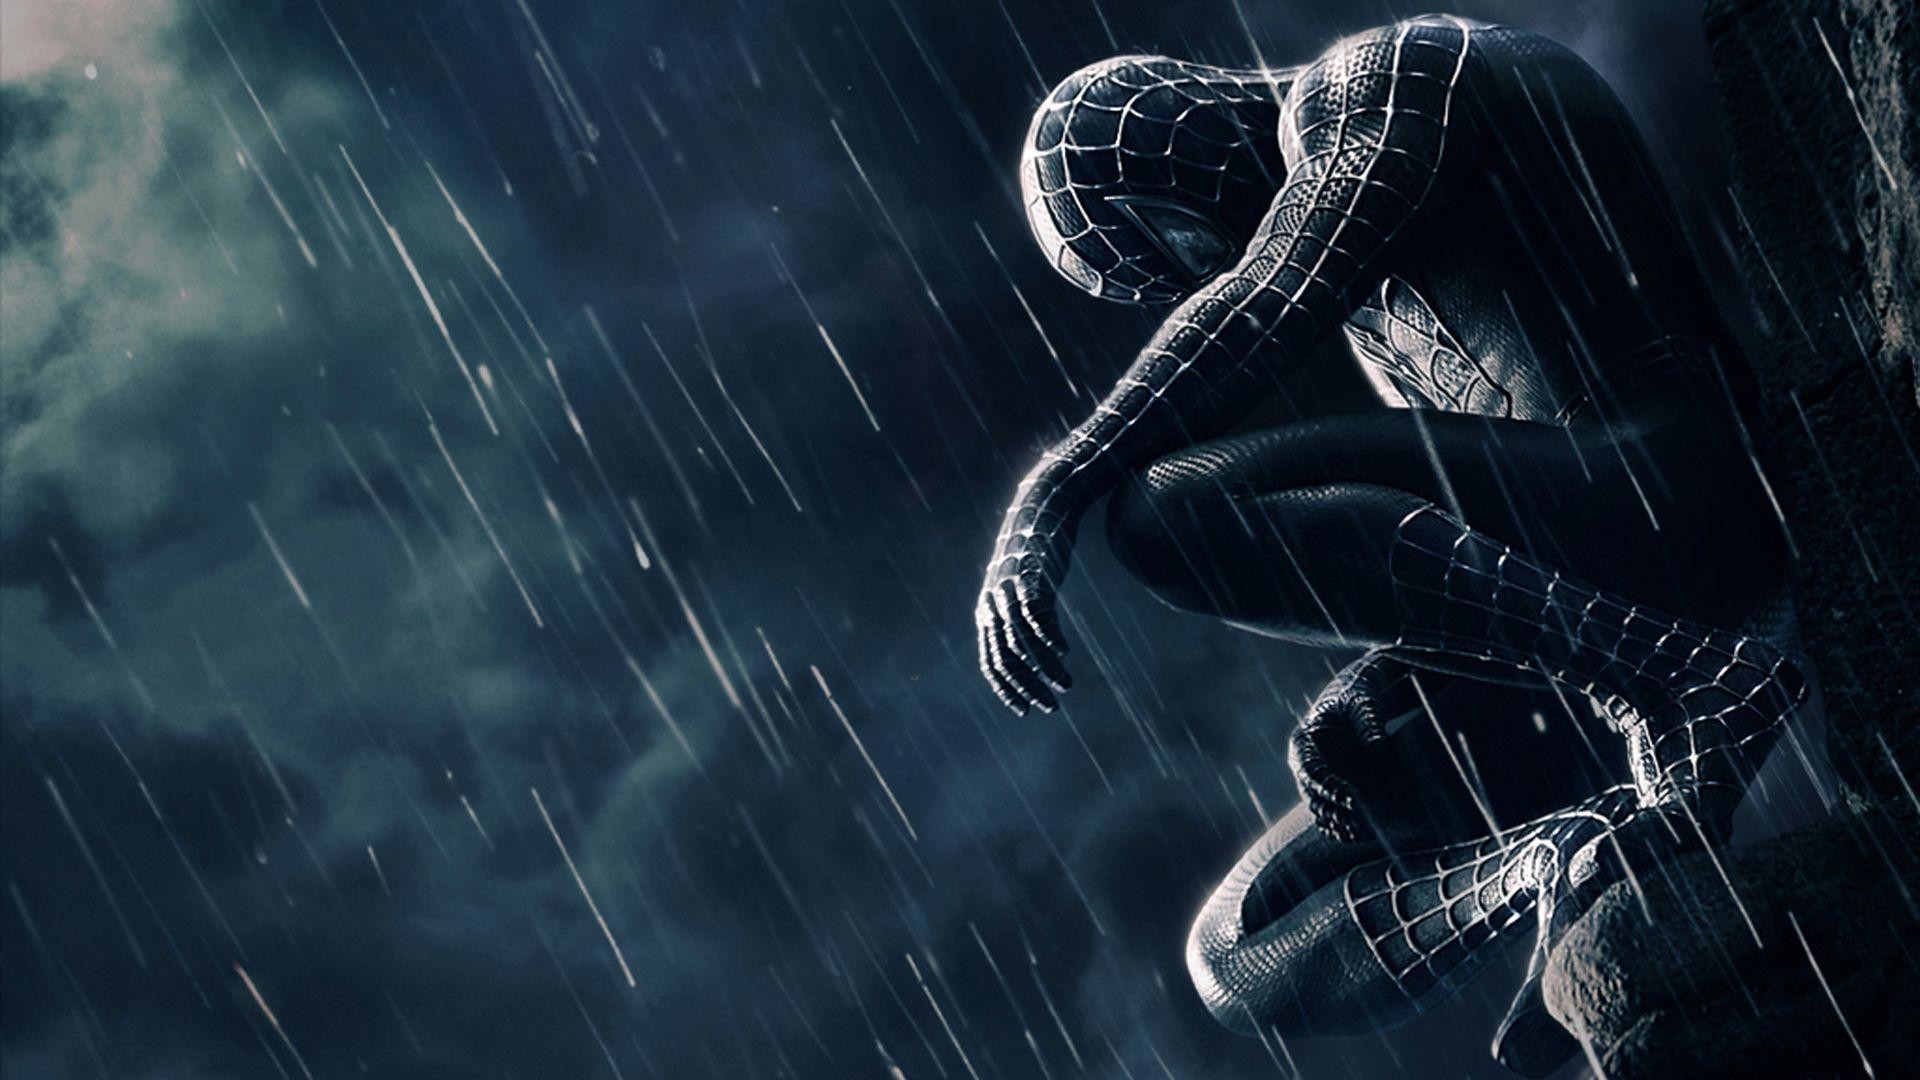 1920x1080 Spiderman HD Wallpaper | Spiderman Images Free | New Wallpapers